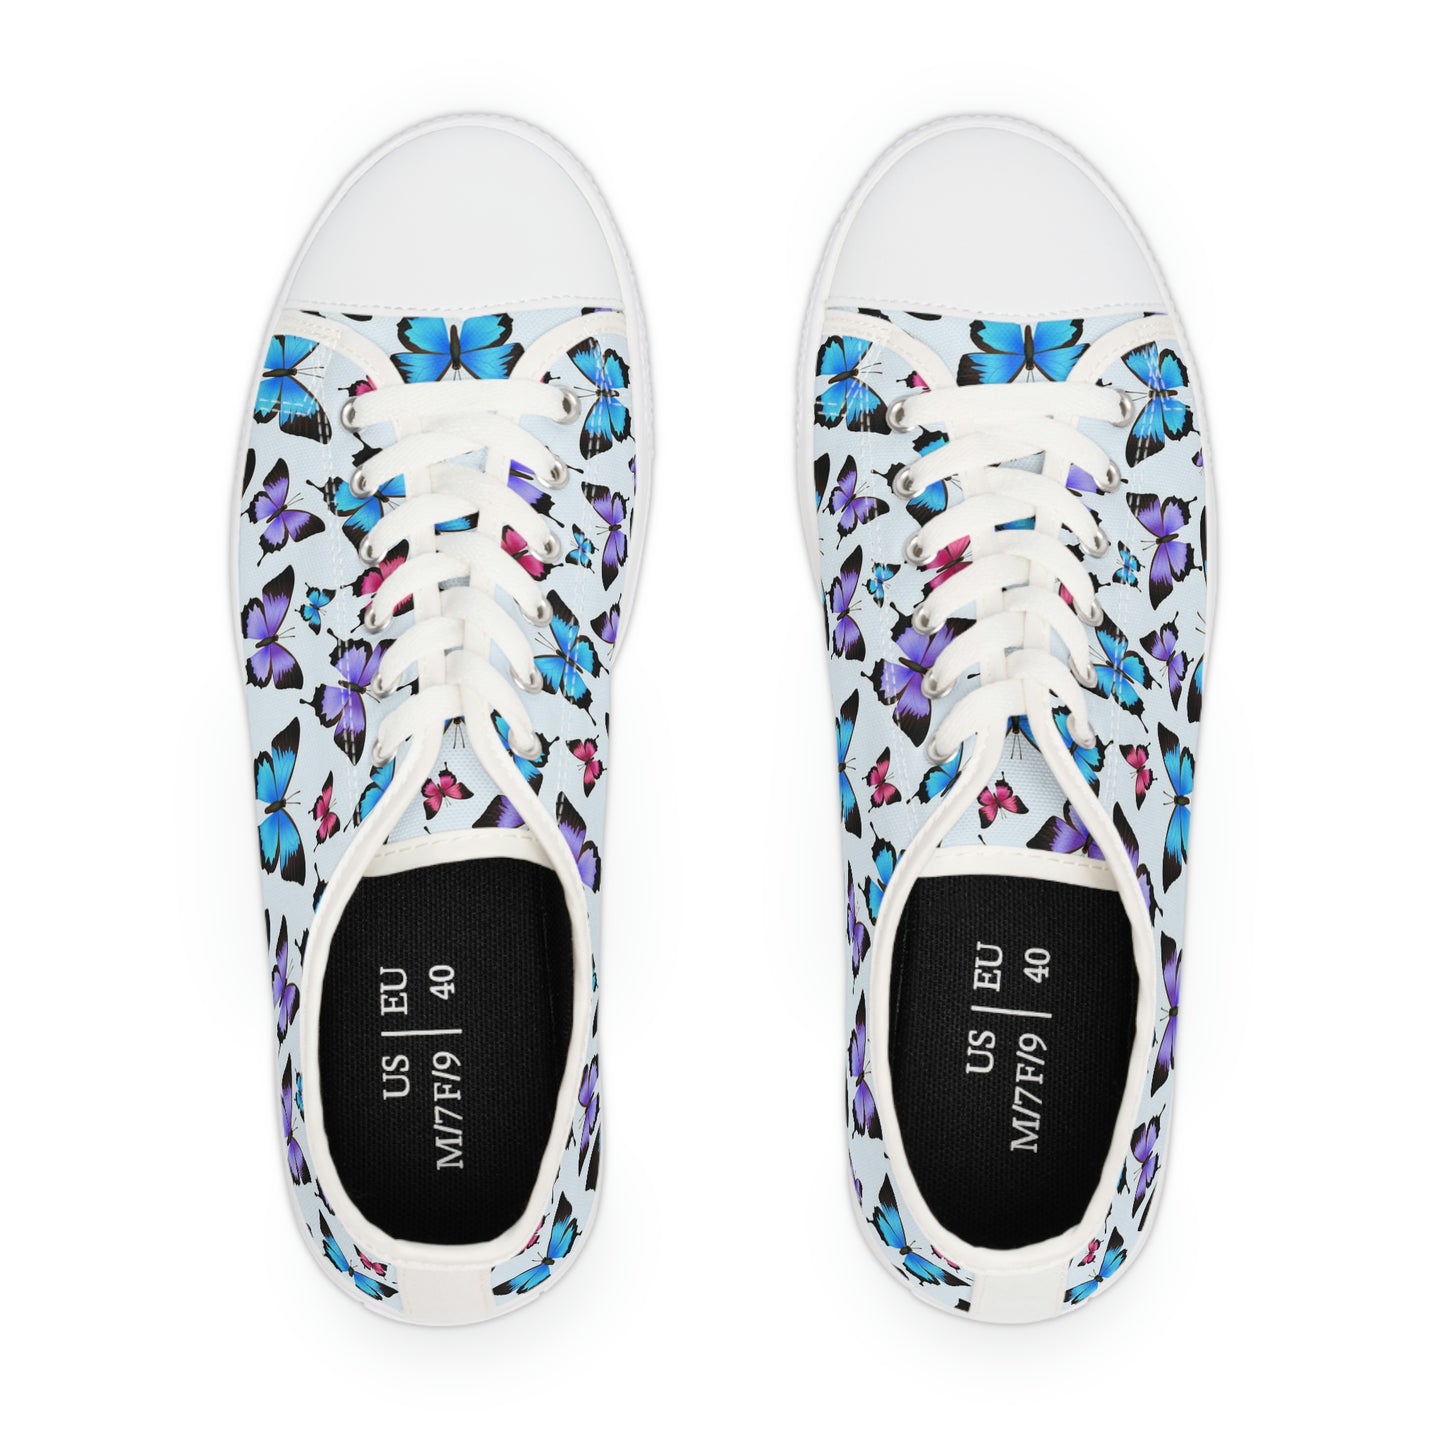 Butterfly Women Shoes, Monarch Blue Sneakers Canvas White Low Top Lace Up Custom Girls Aesthetic Flat Shoes